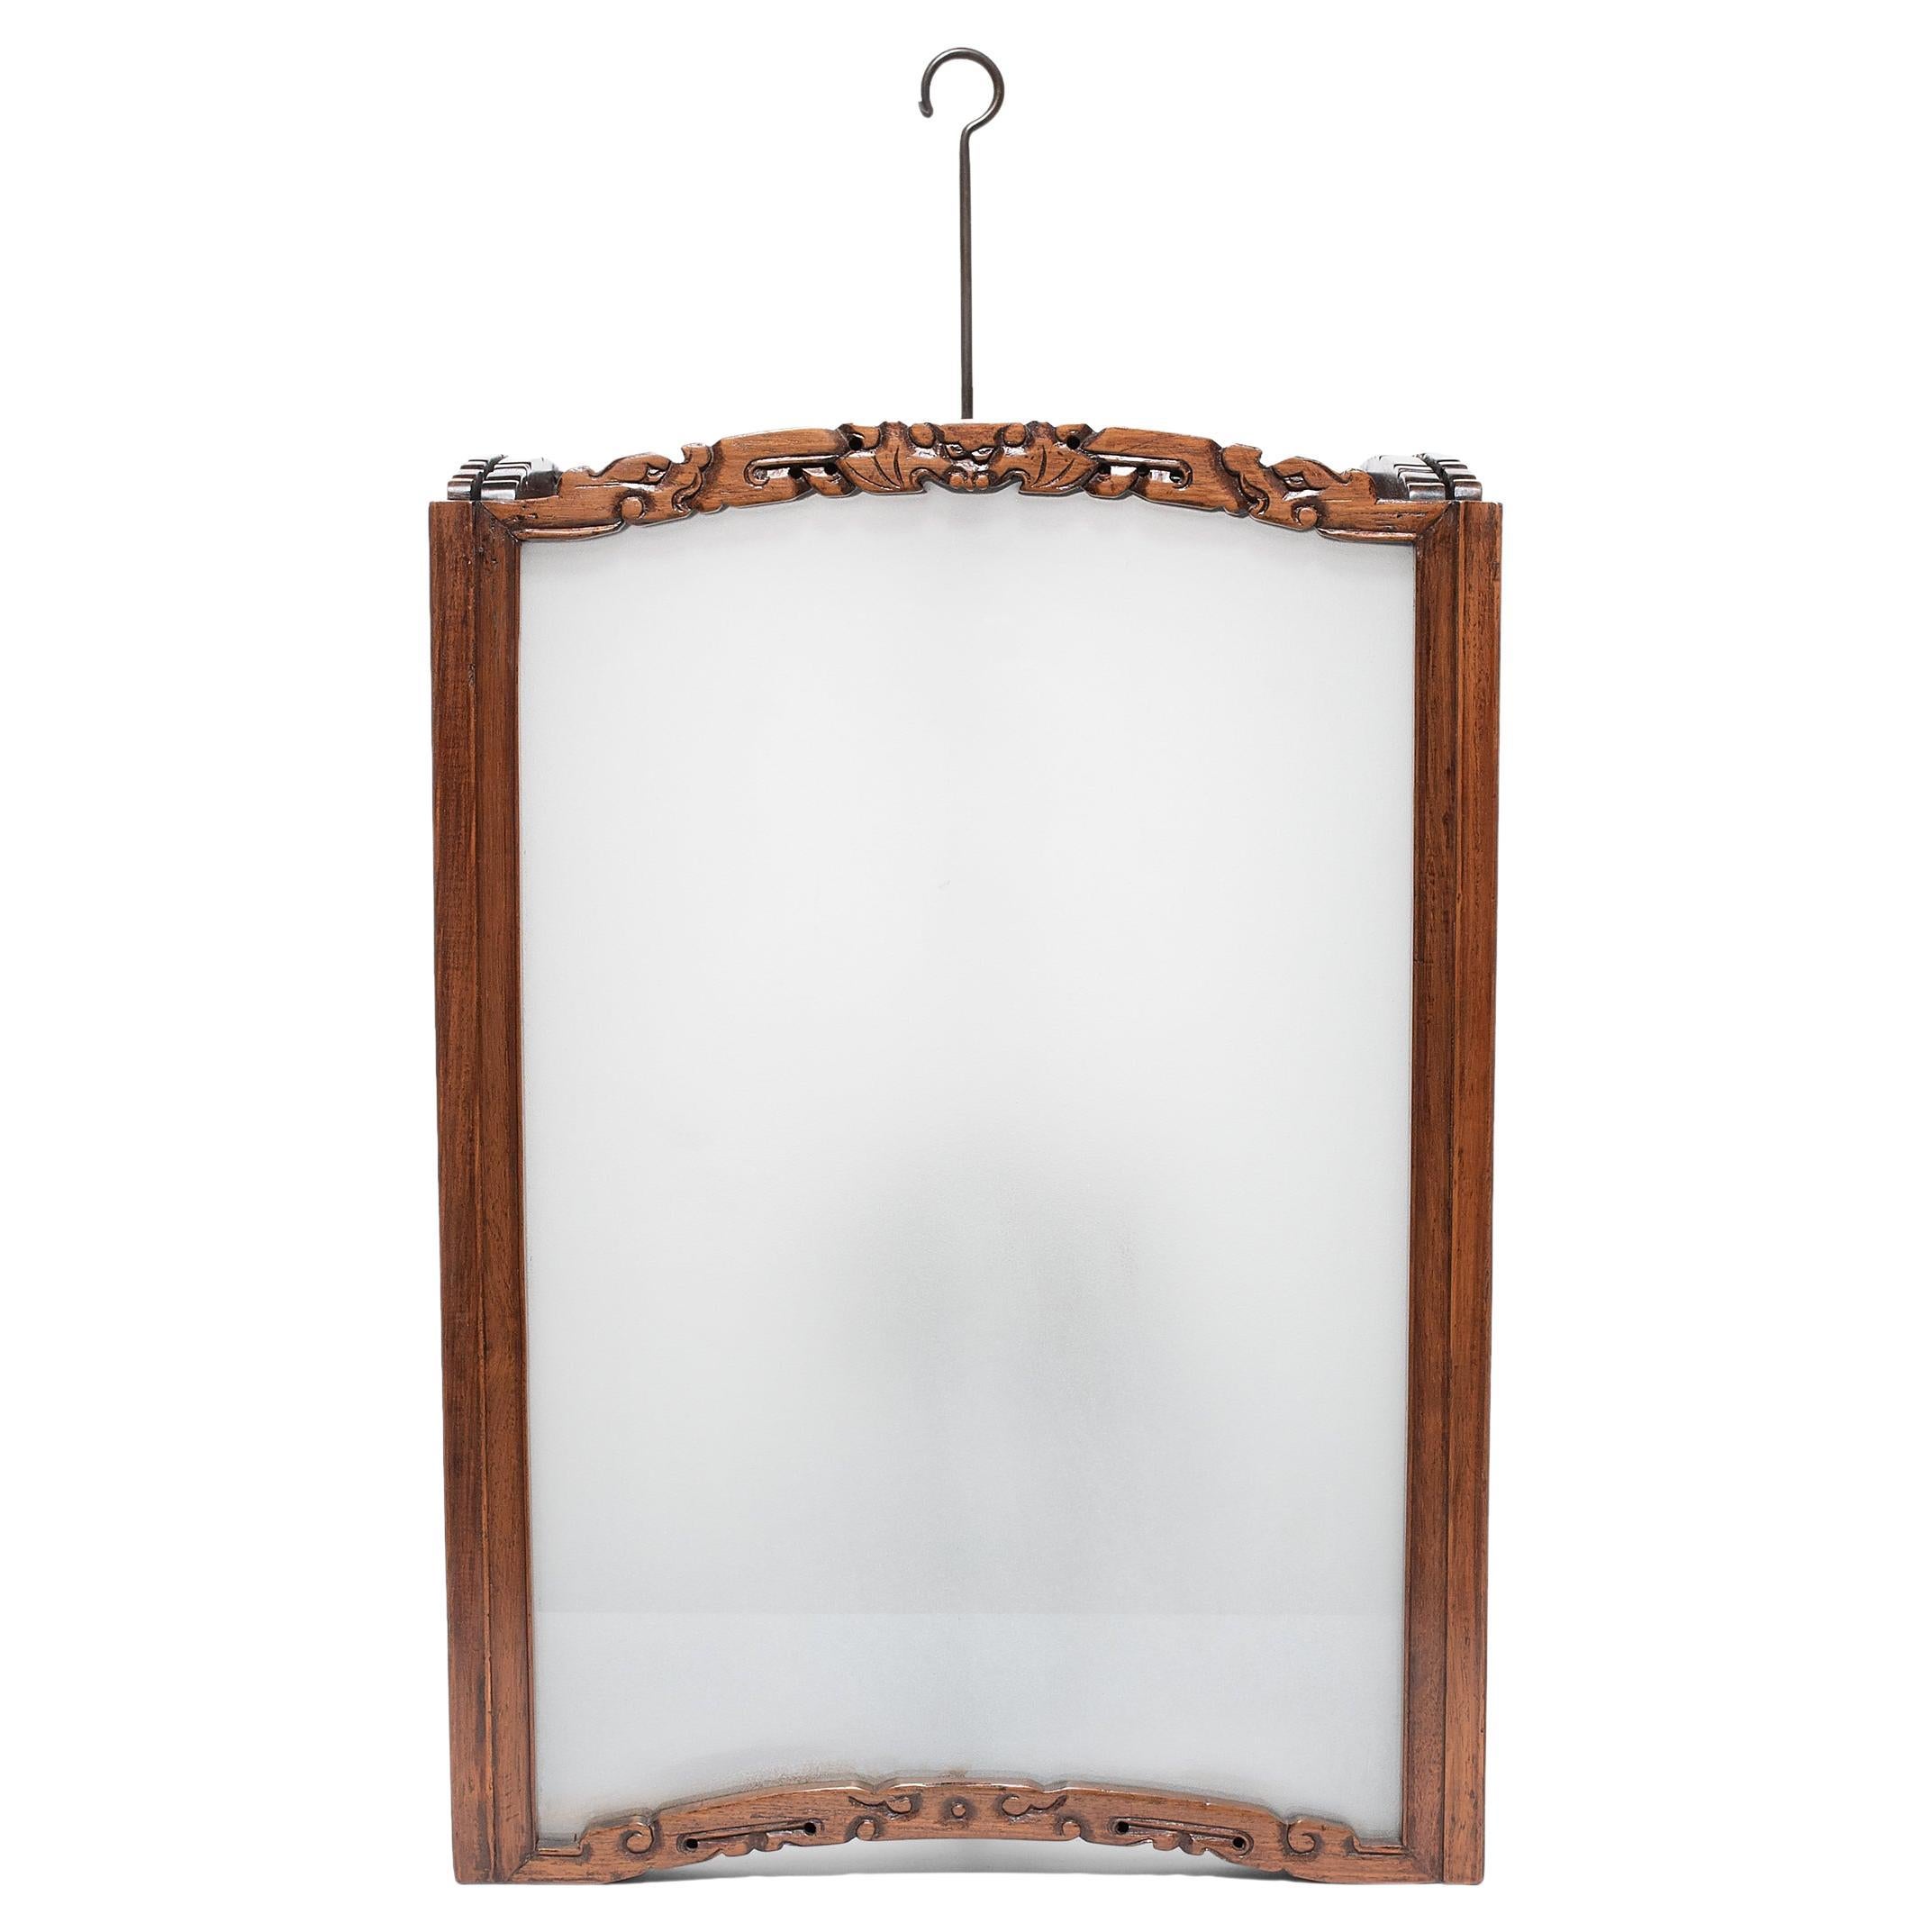 Chinese Arched Hanging Lantern, c. 1850 For Sale